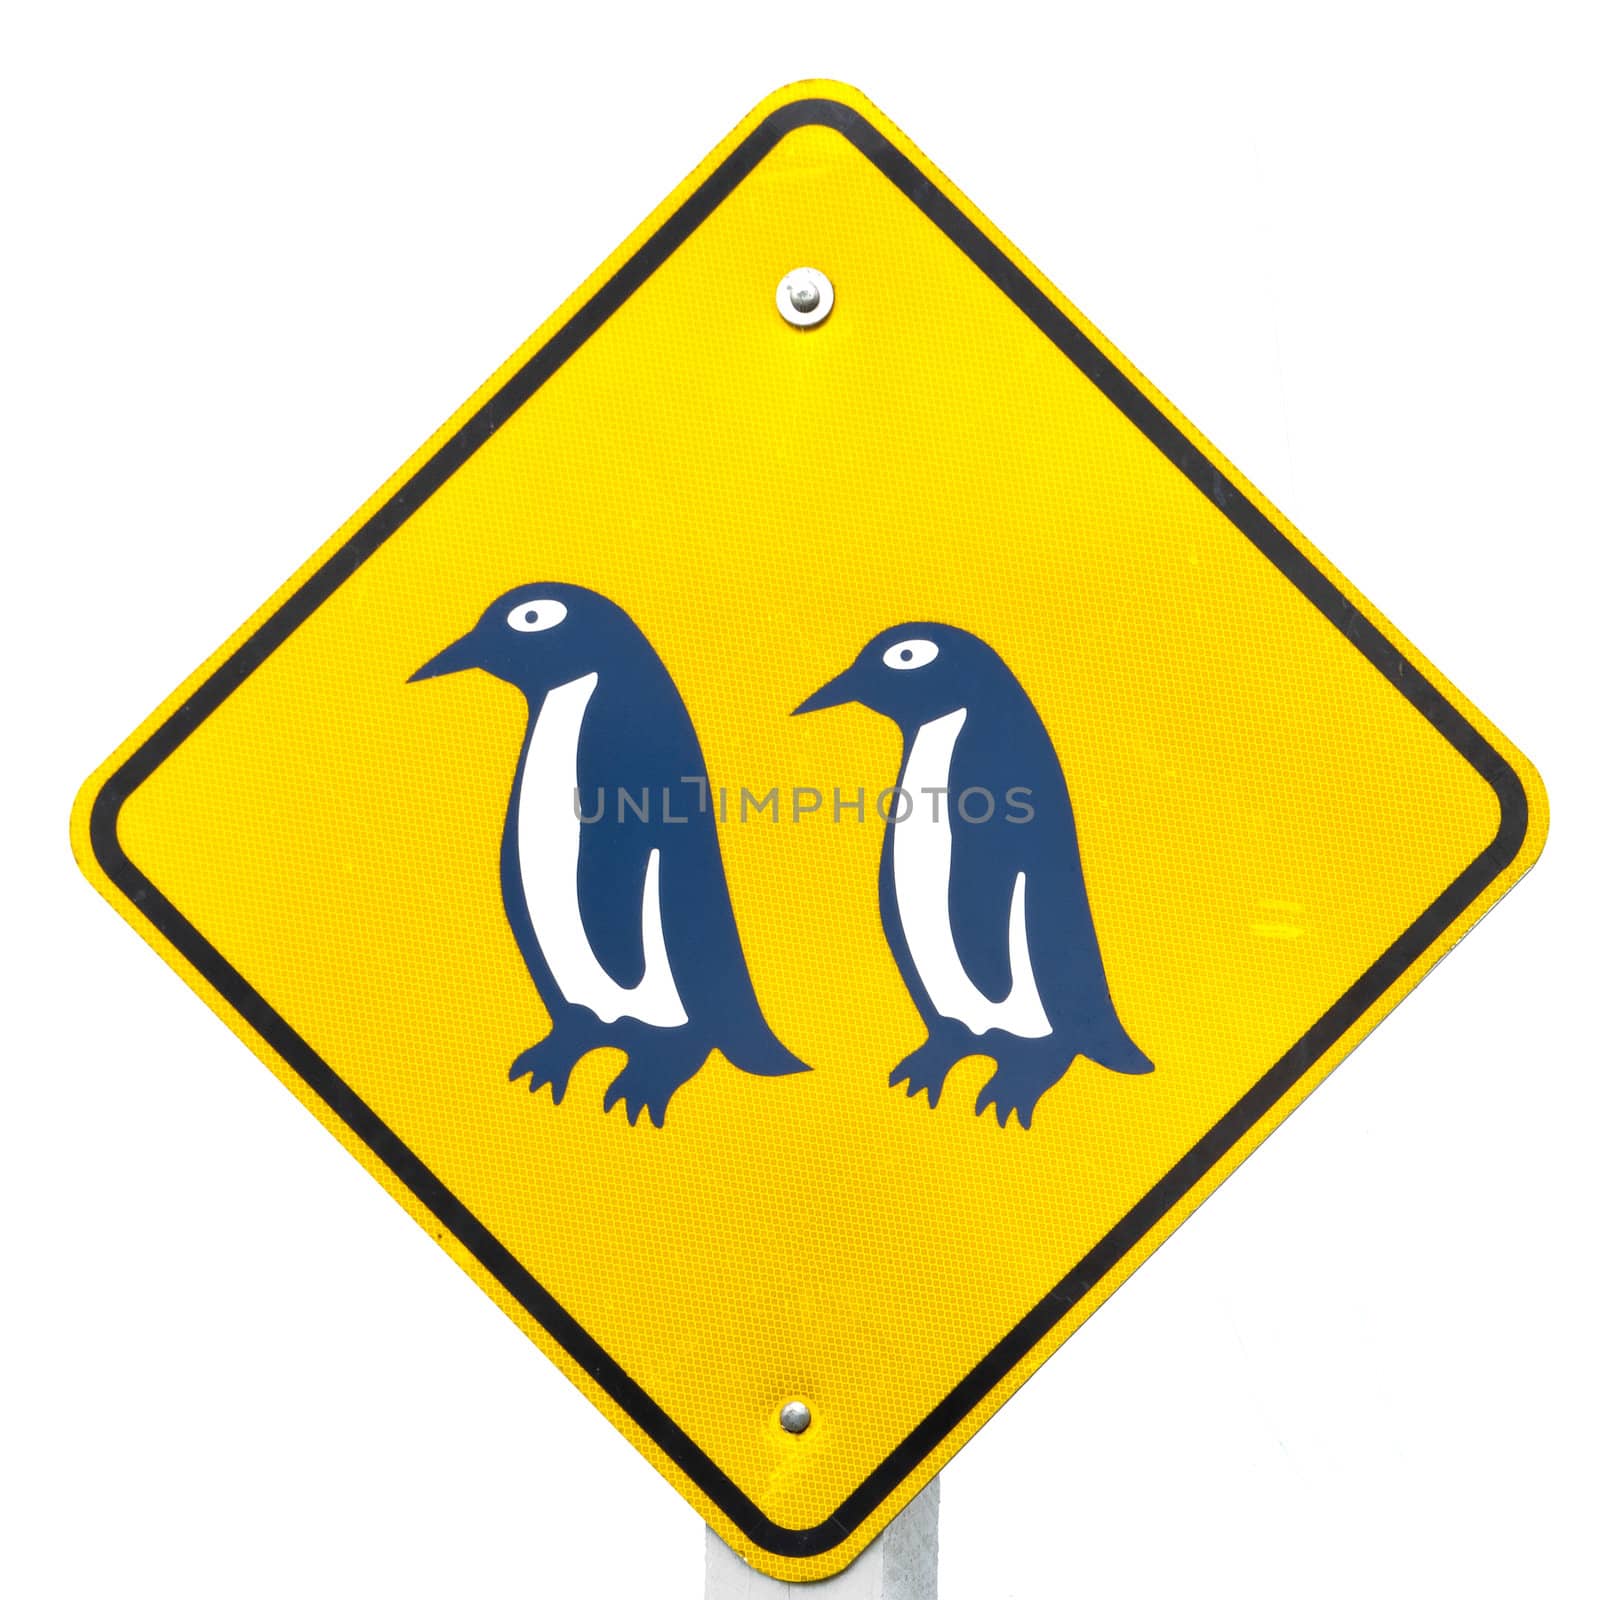 Attention Blue Penguin Crossing Road Sign by PiLens